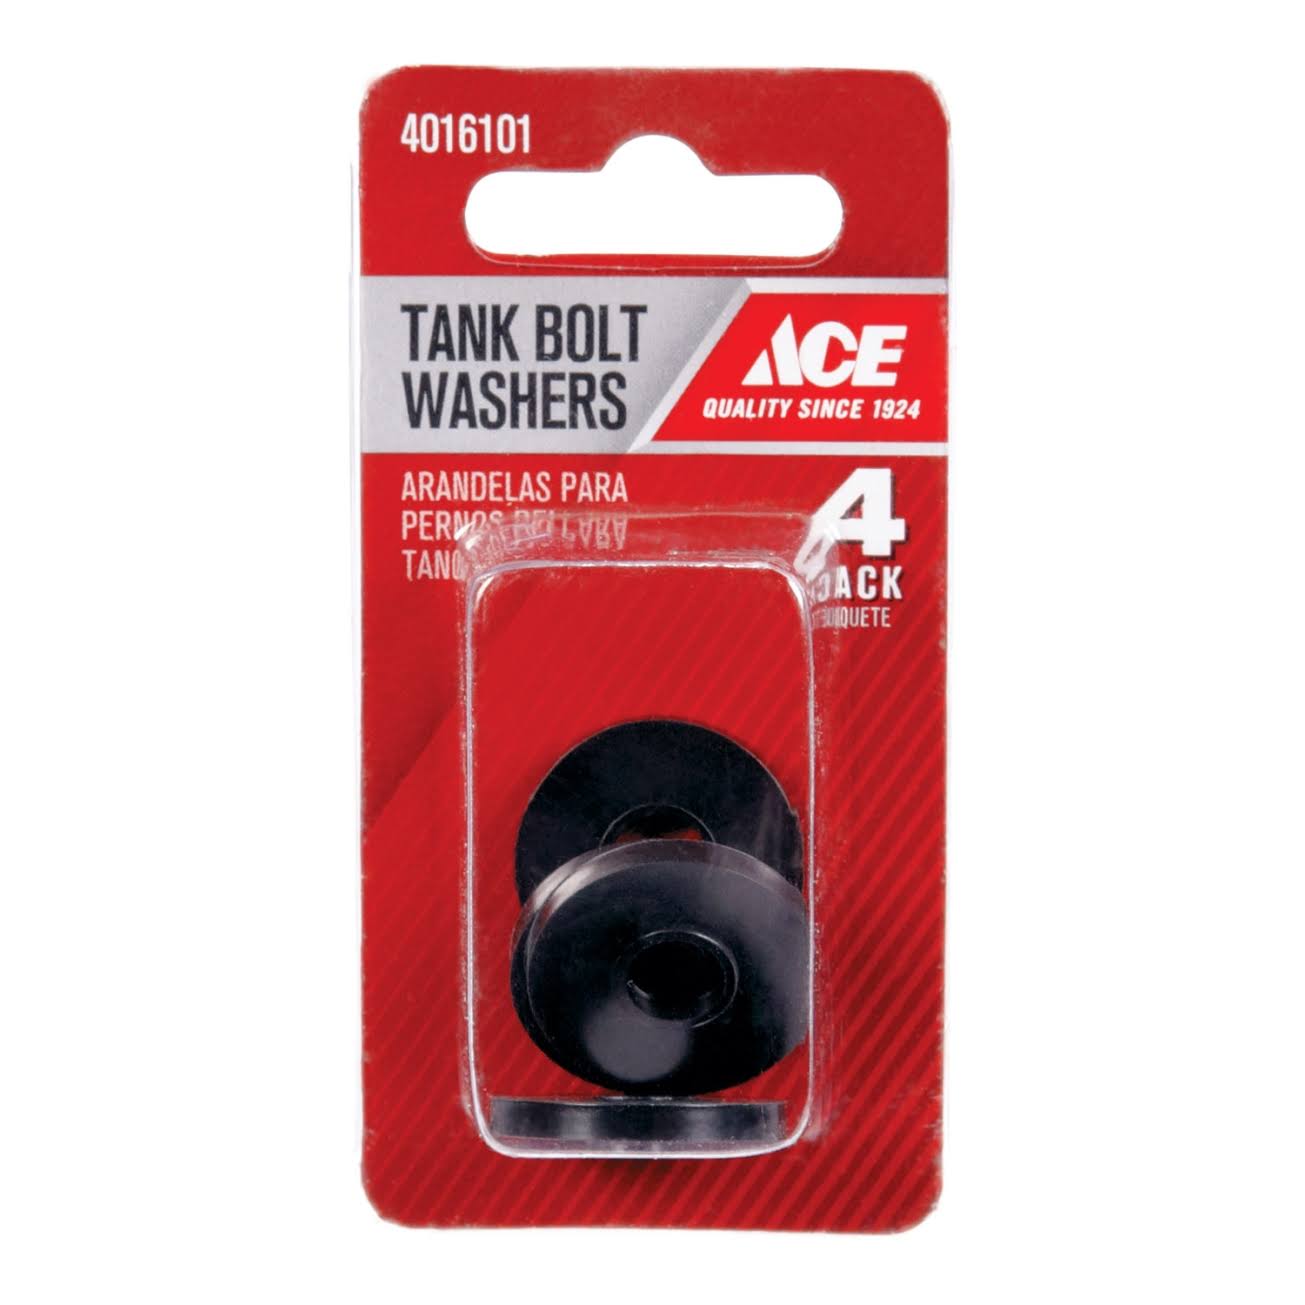 Ace Tank Bolt Washers - 1 1/16" x 1/8", 4 Pack